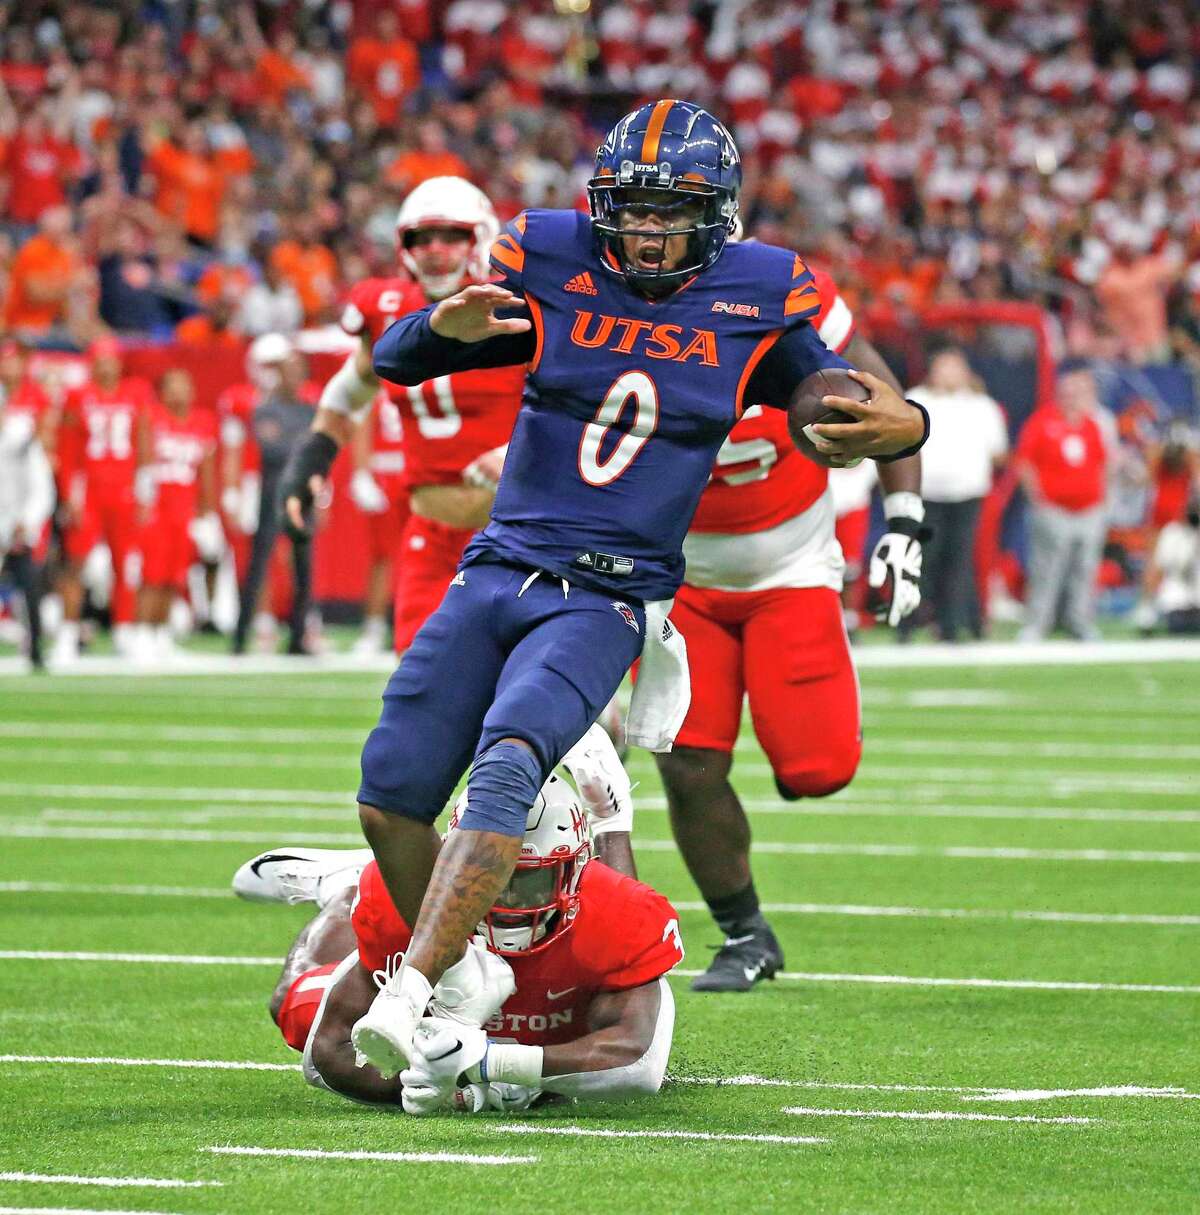 UTSA quarterback Frank Harris has contributed with his legs this season, as well, rushing for 93 yards and a touchdown over the Roadrunners’ first two games.